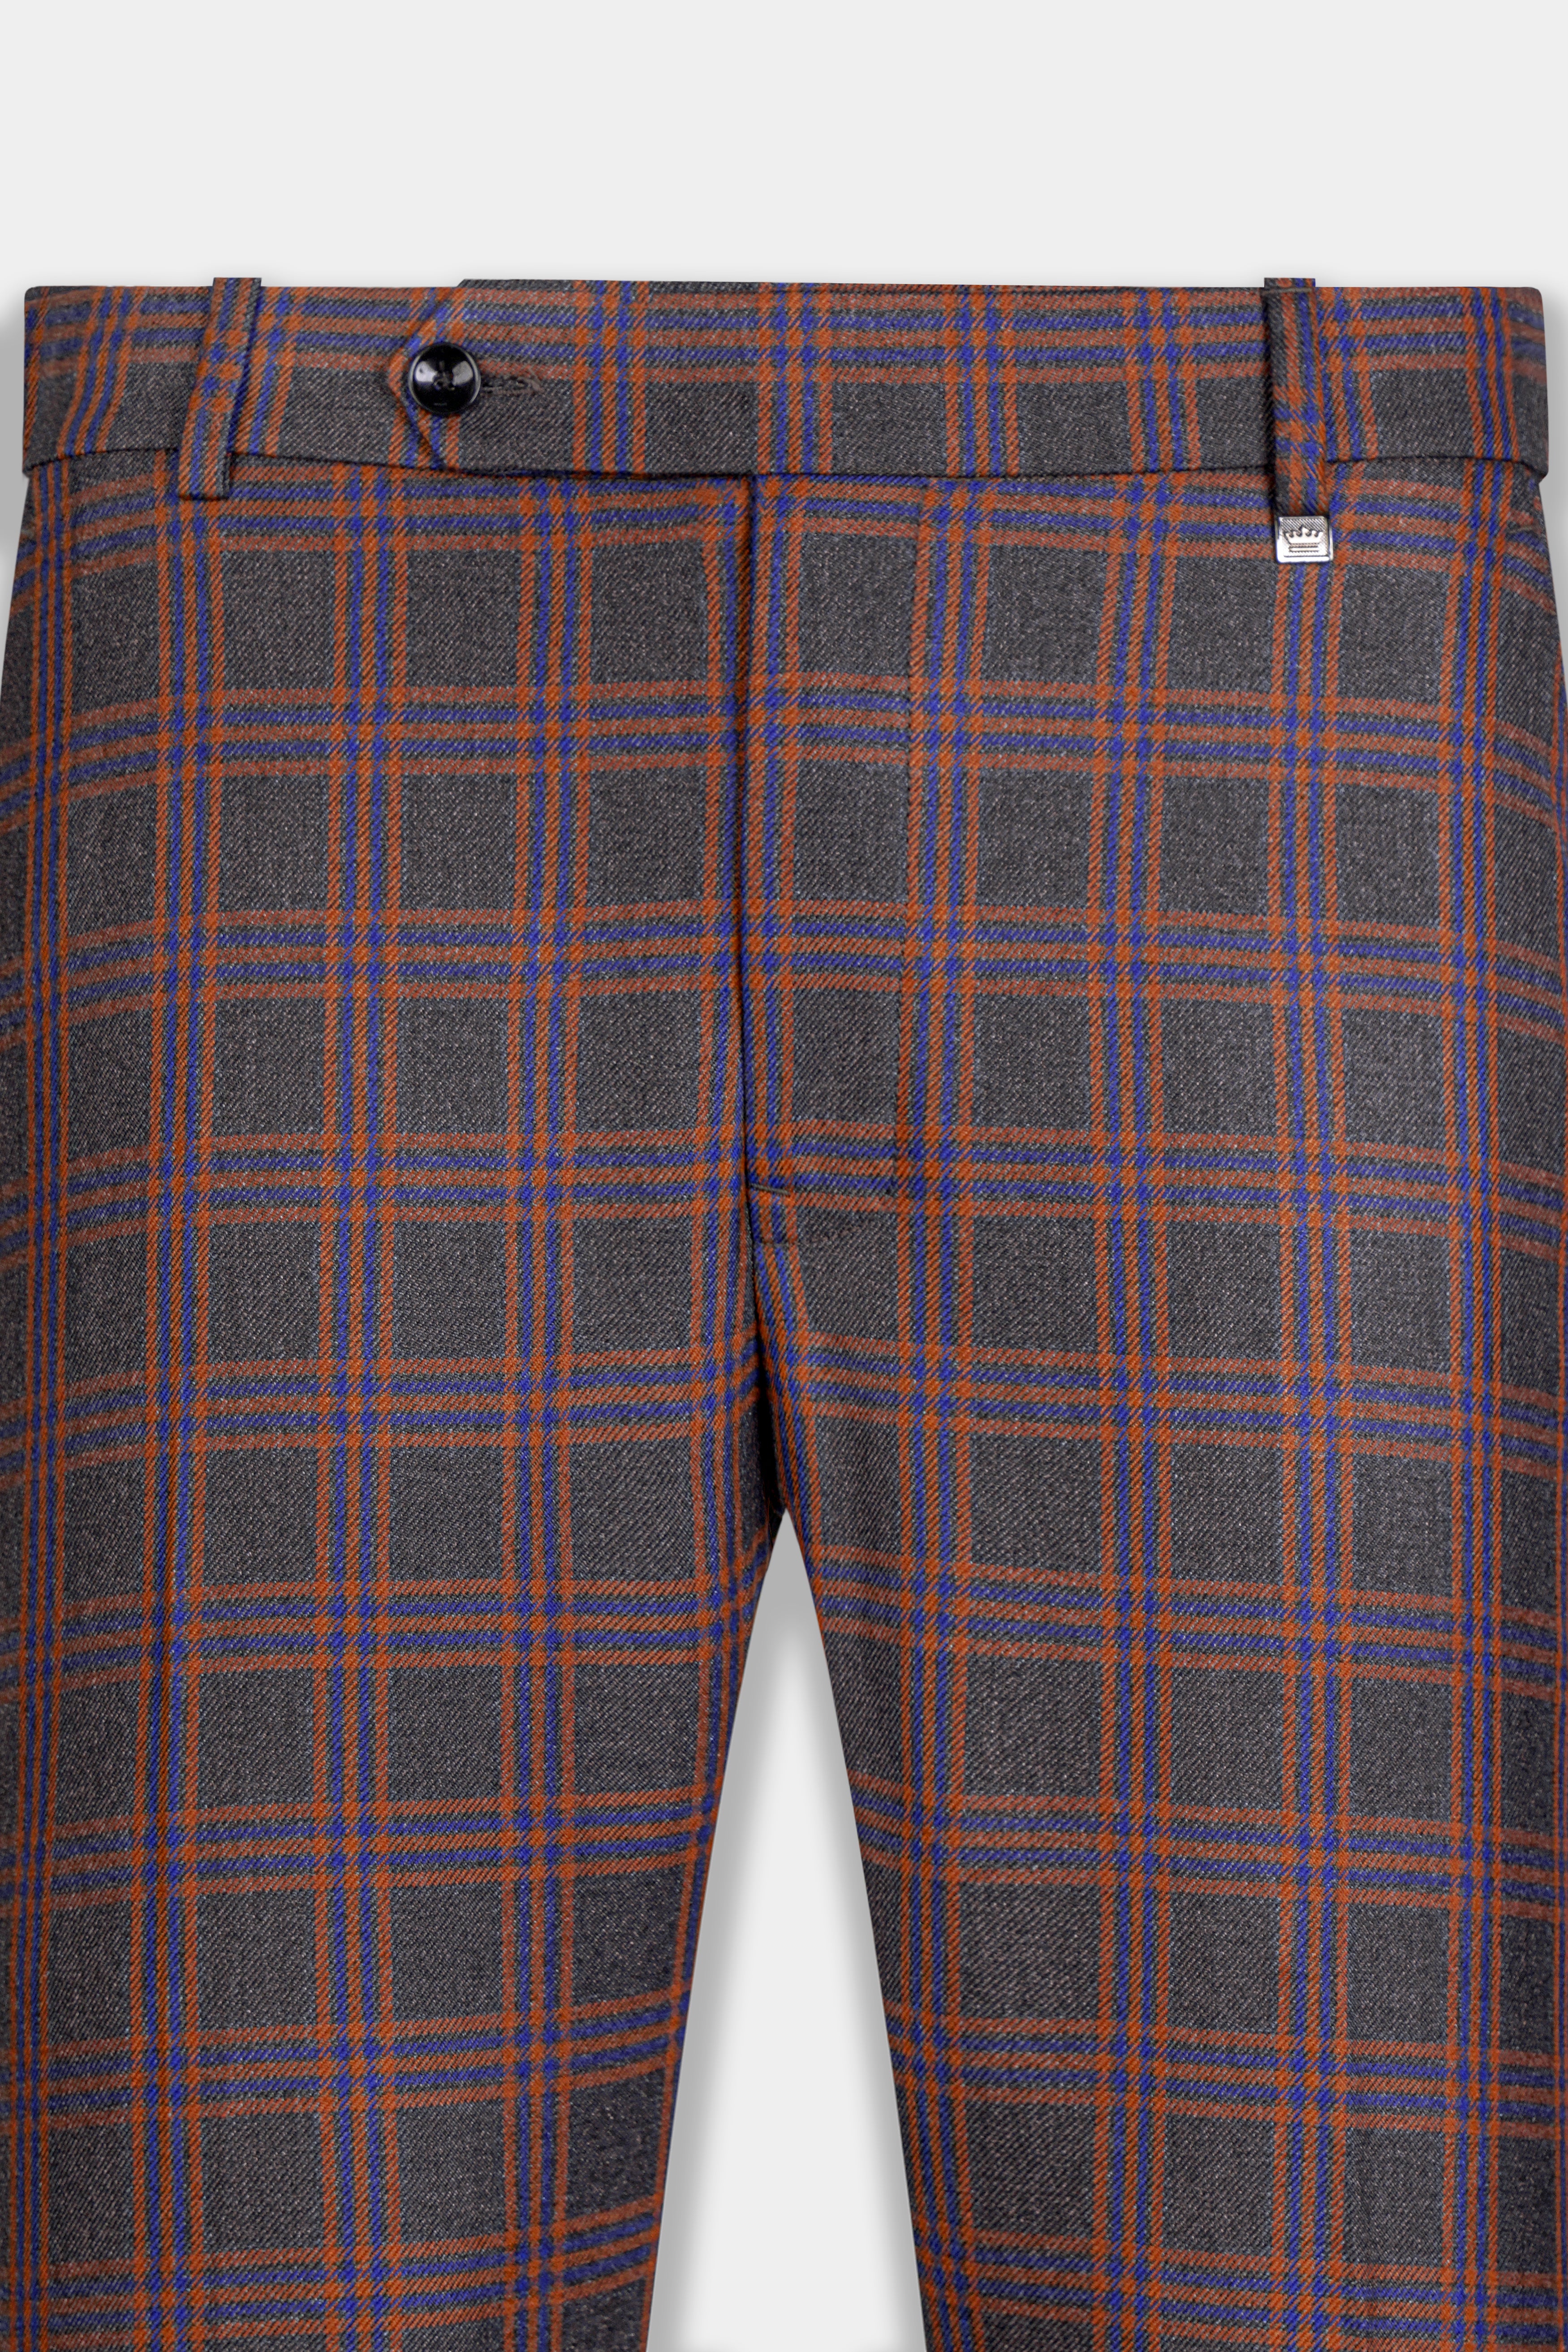 Emperor Gray and Russet Brown Plaid Tweed Double Breasted Suit